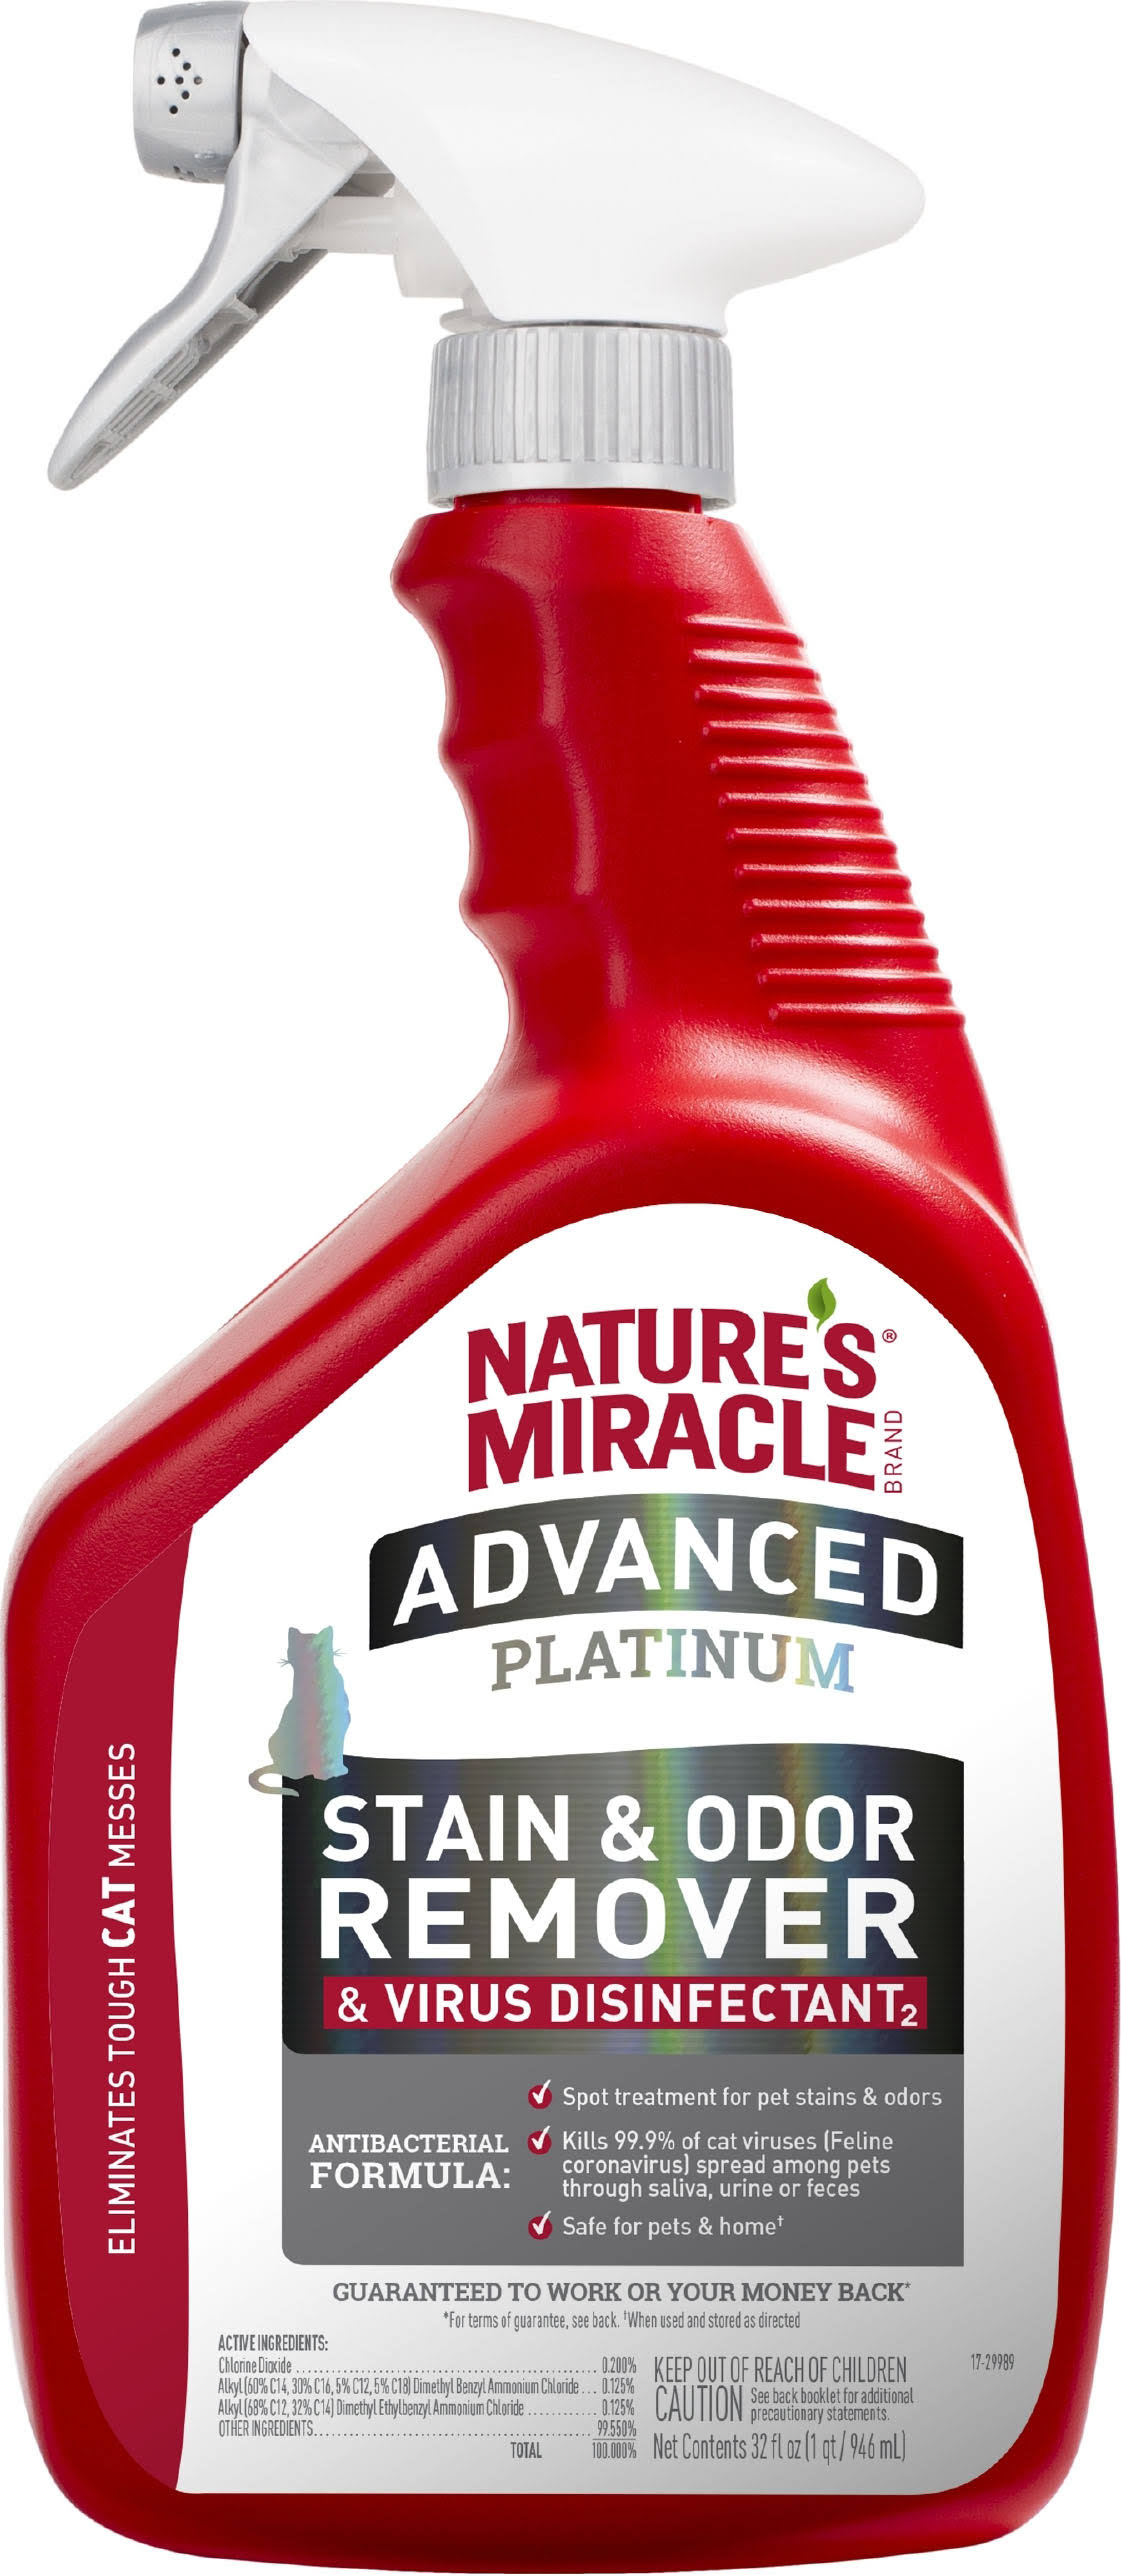 Nature's Miracle Advanced Platinum Stain & Odor Remover & Virus Disinfectant 32 oz